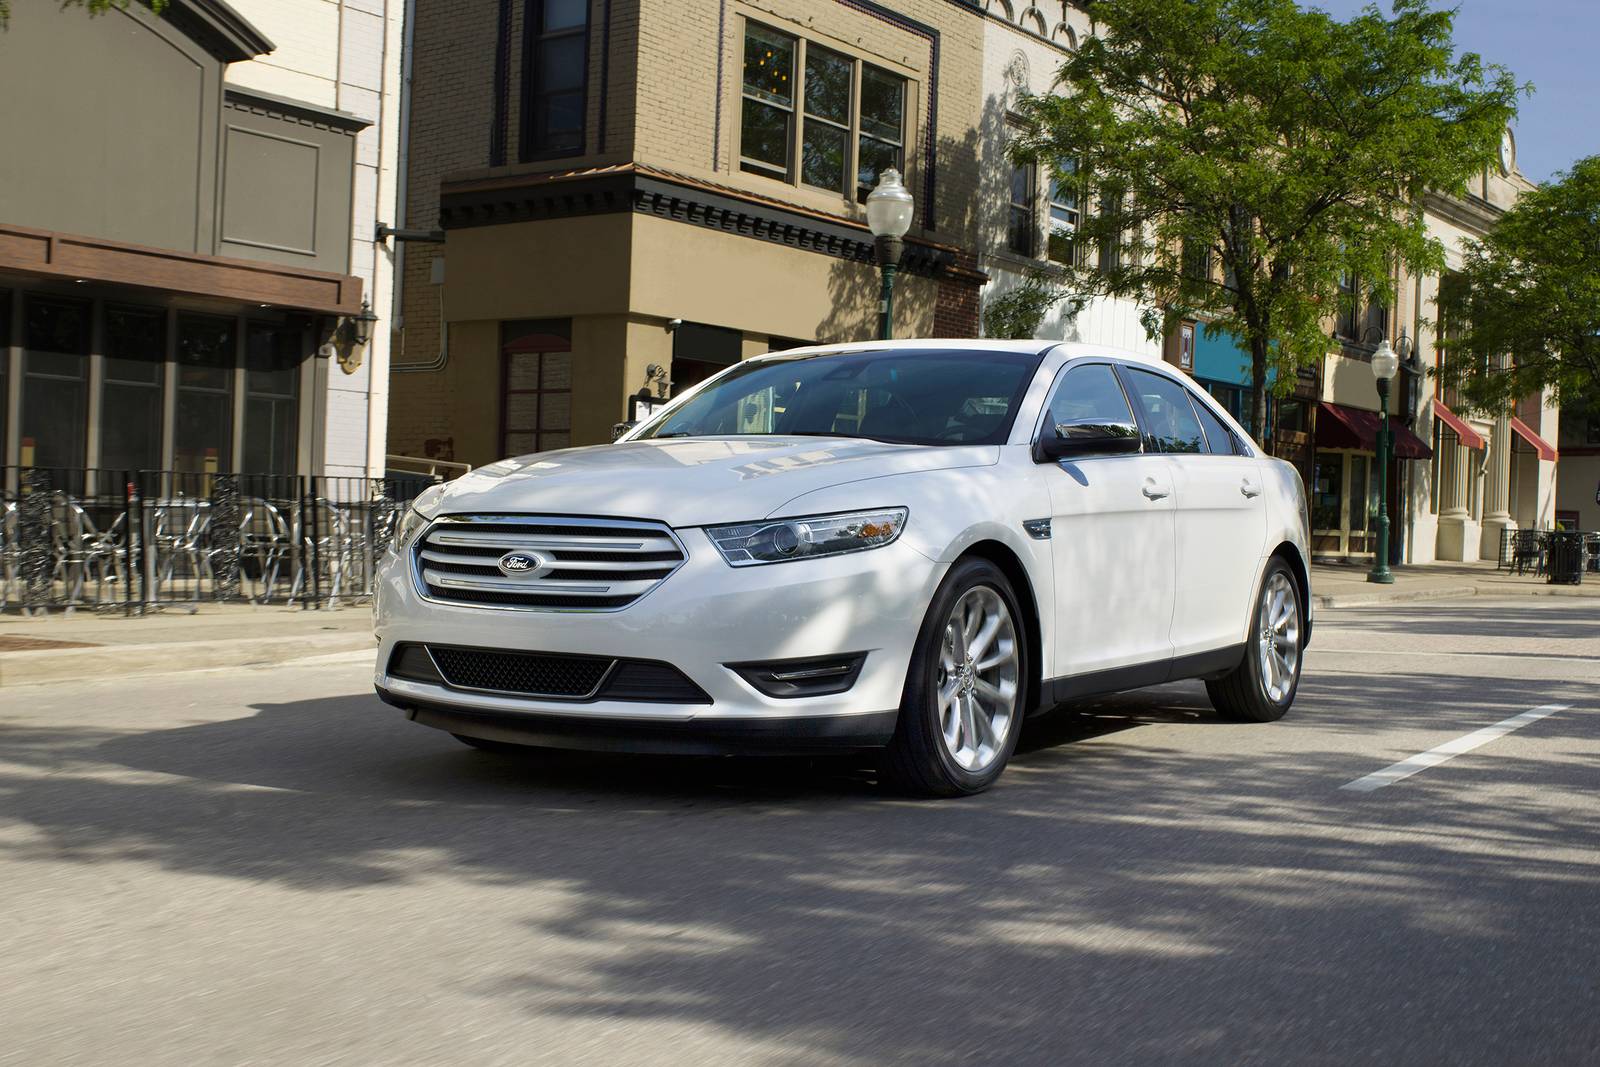 2018 Ford Taurus Review & Ratings | Edmunds